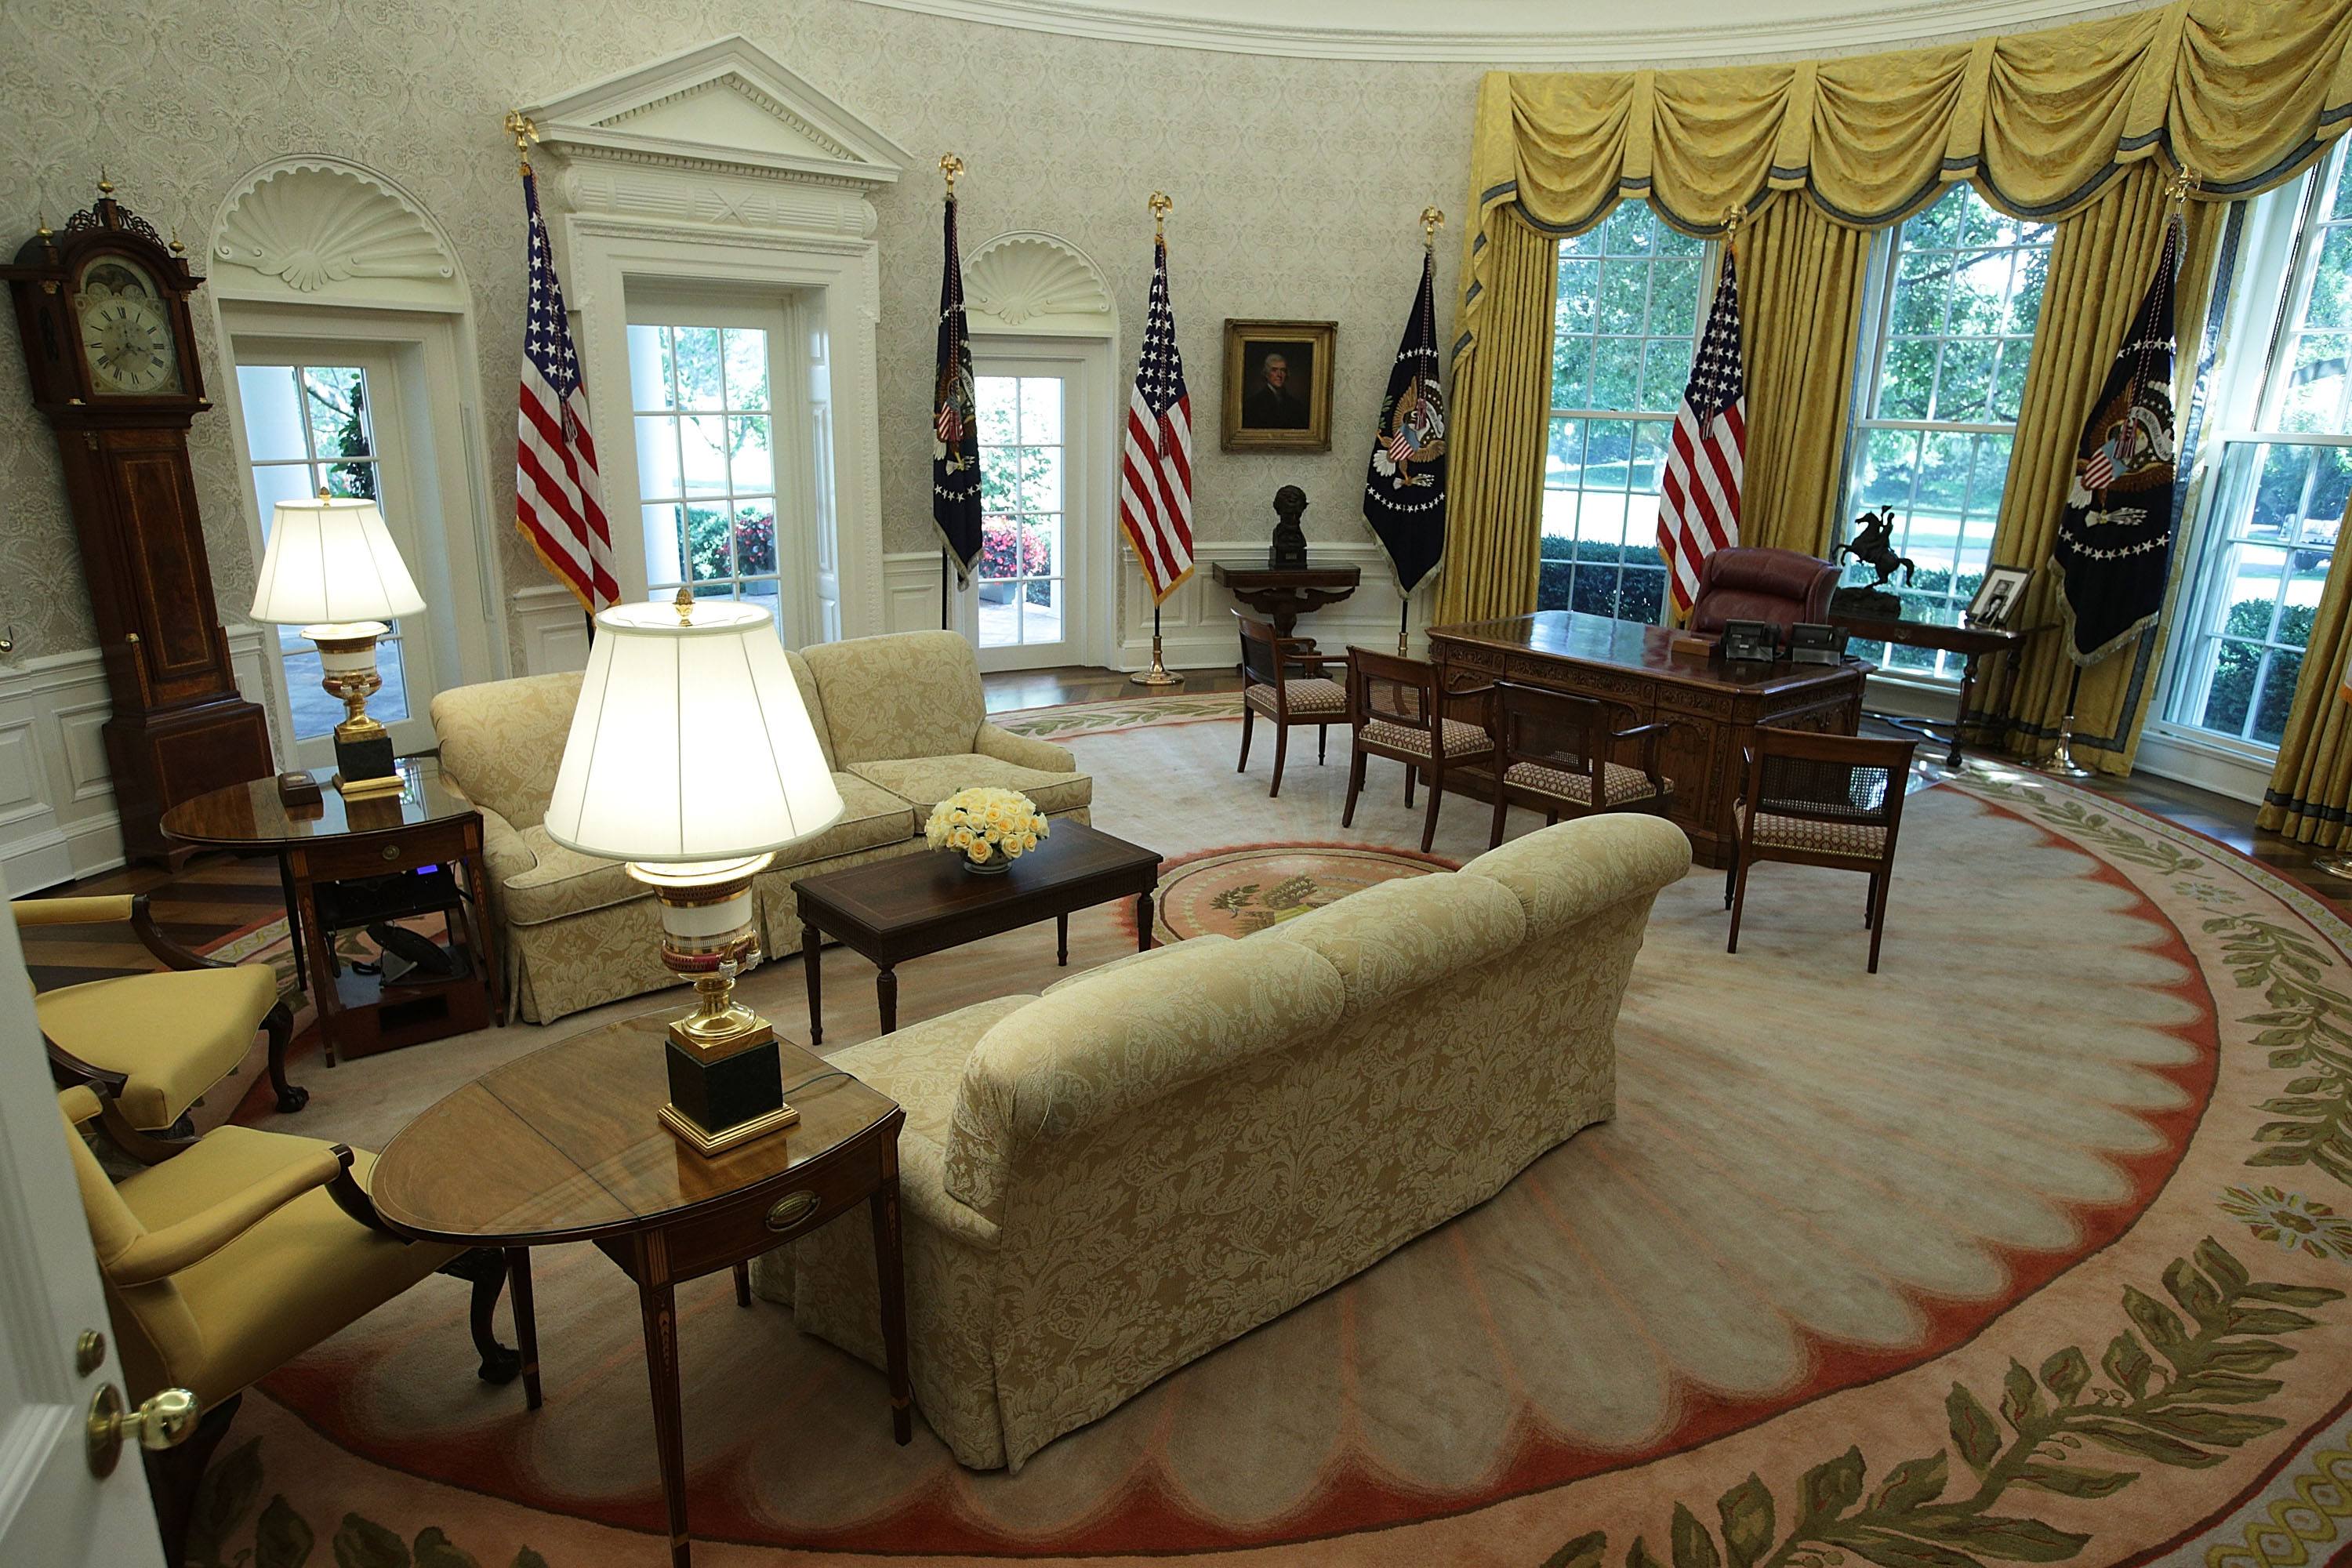 This Is the First Thing Donald Trump Changed in the Oval Office ...